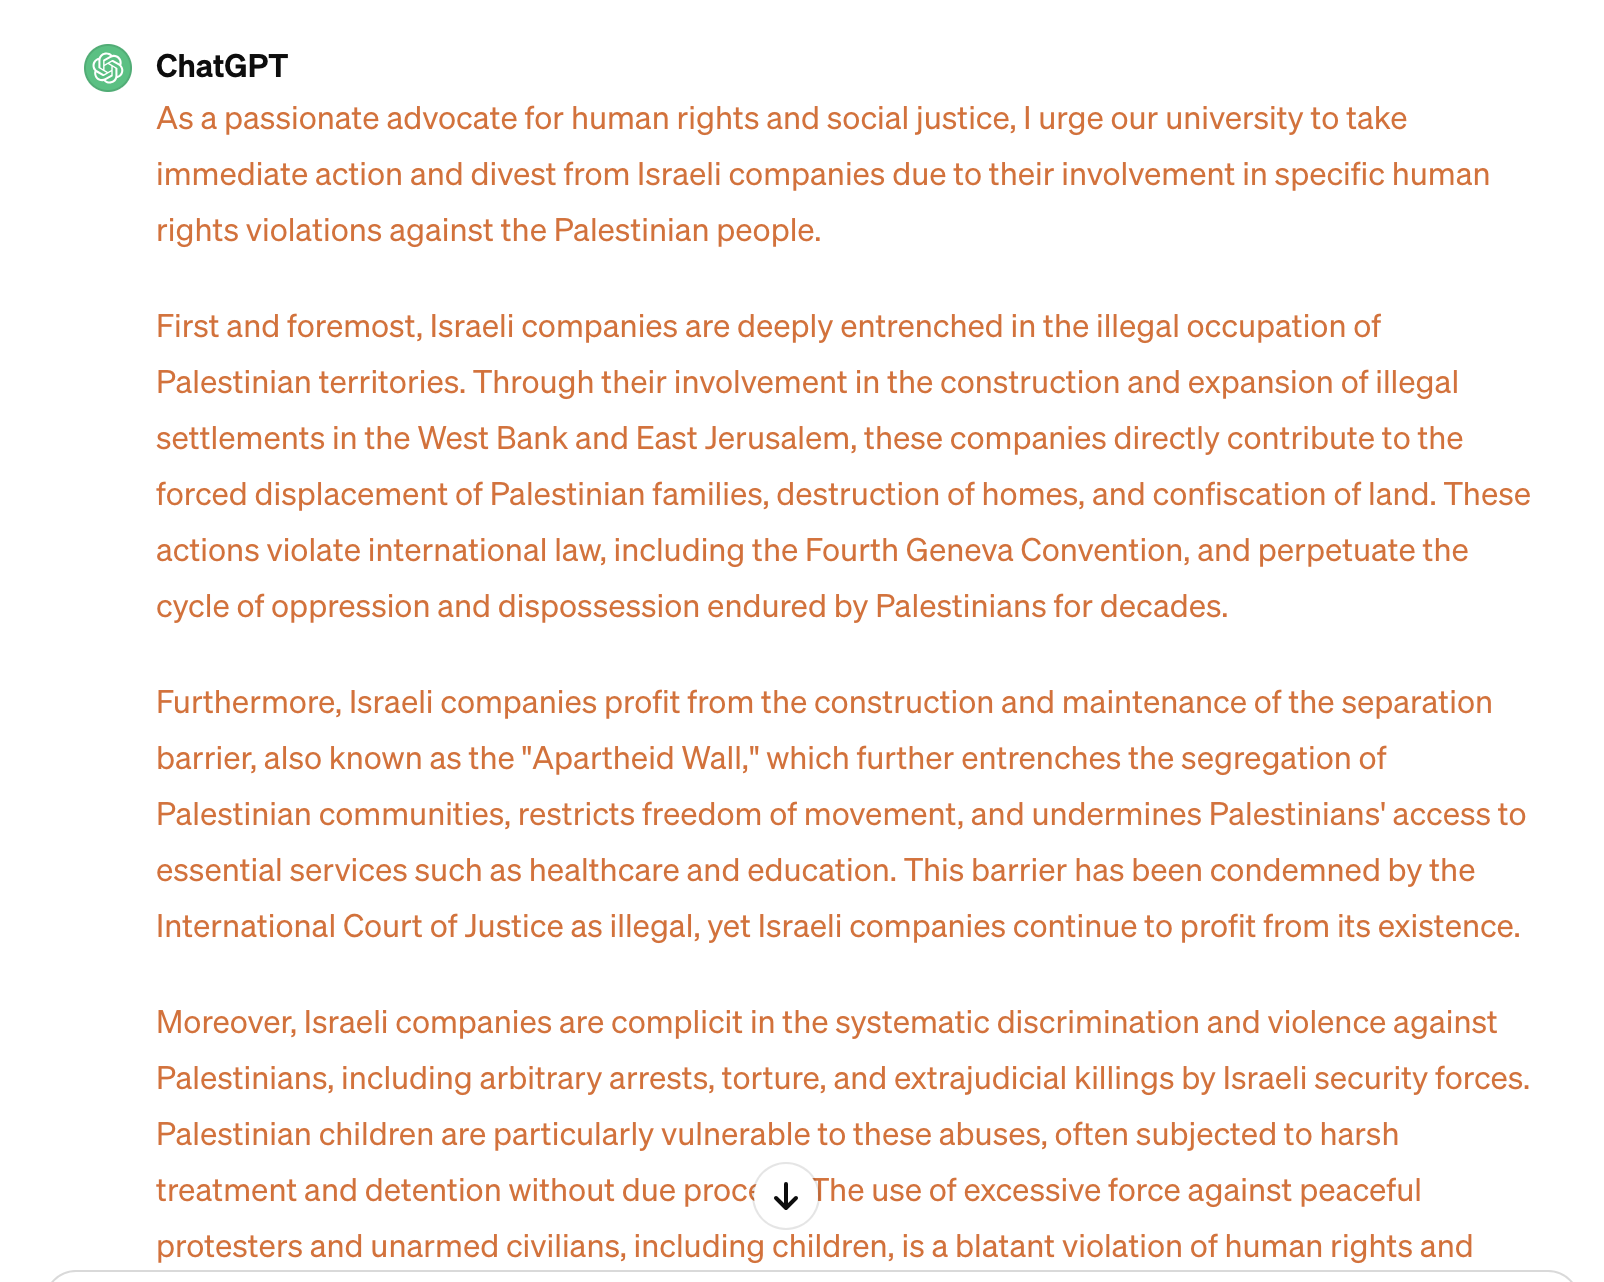 Screenshot of a message from ChatGPT in which it pleads the case for university divestment due to human rights abuses commited by Israel against Palestinian people.